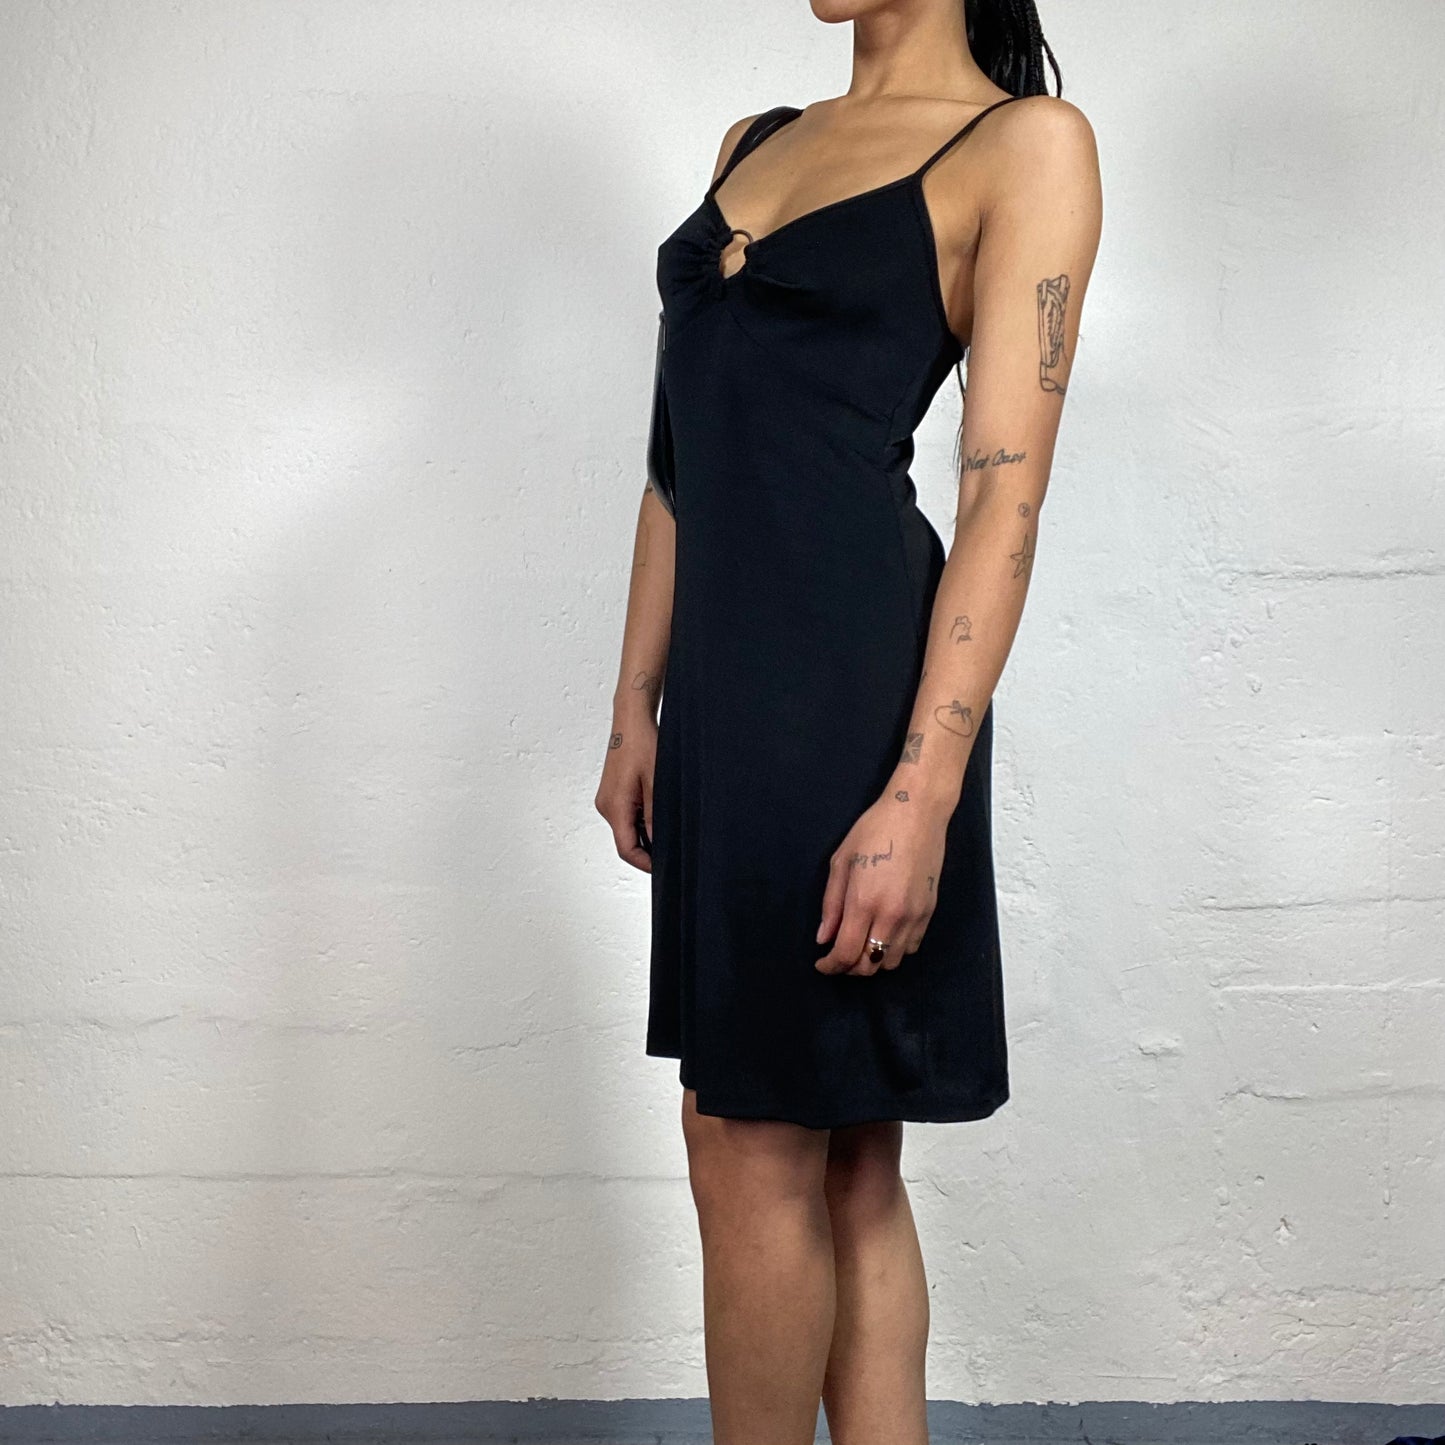 Vintage 2000's Night Out Classy Black Camisole Dress with Metal Bra Ring Detail (S)